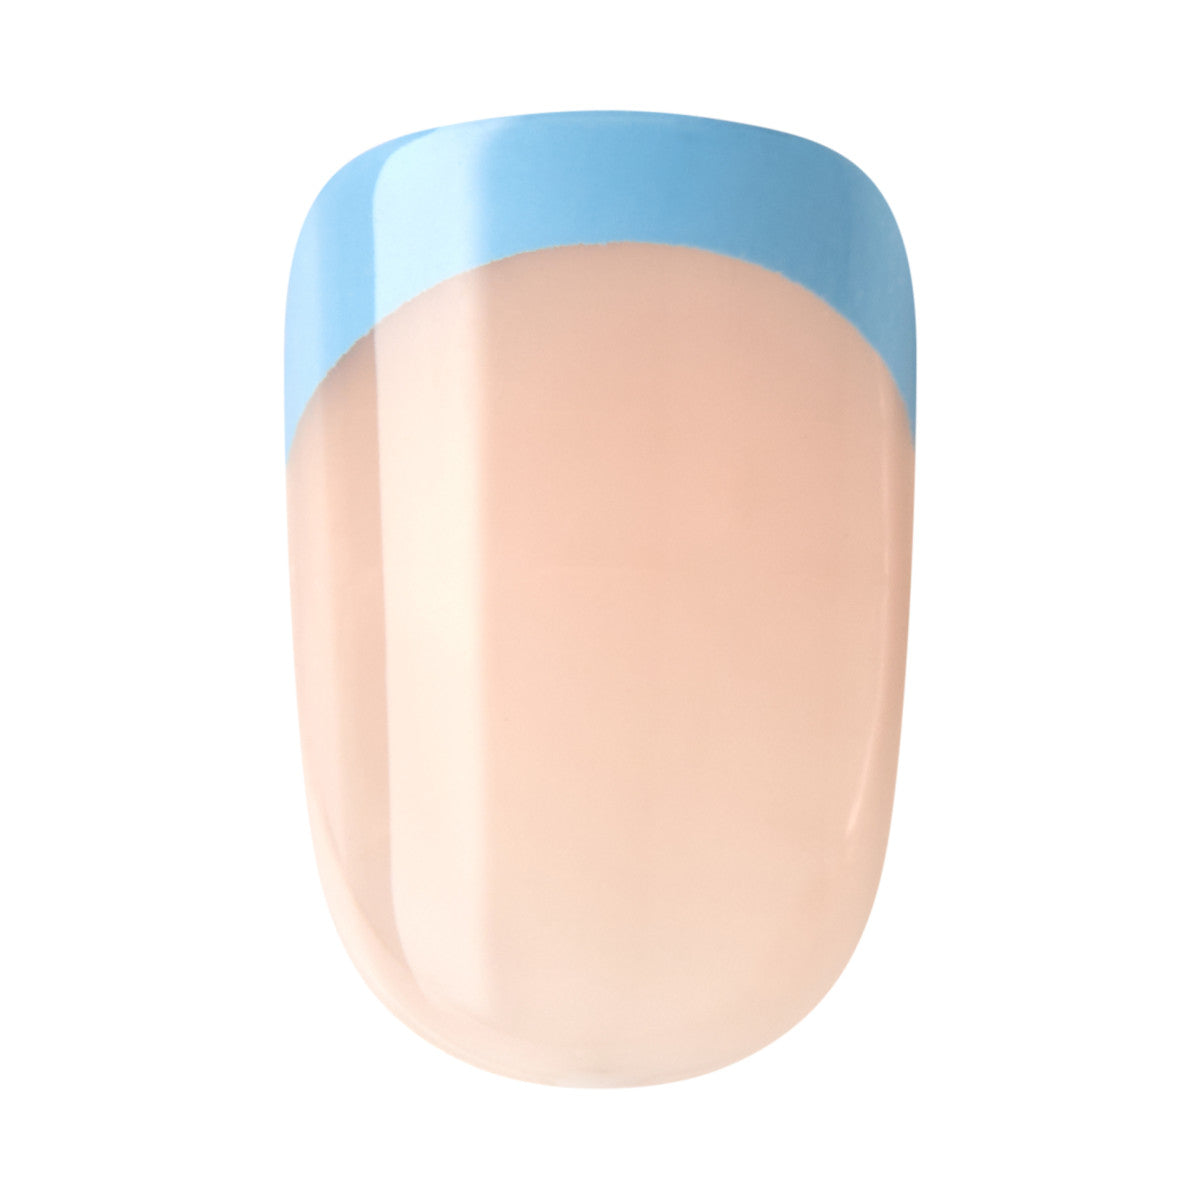 KISS imPRESS No Glue Mani Press On Nails, French, Snooze, Blue, Short Squoval, 30ct